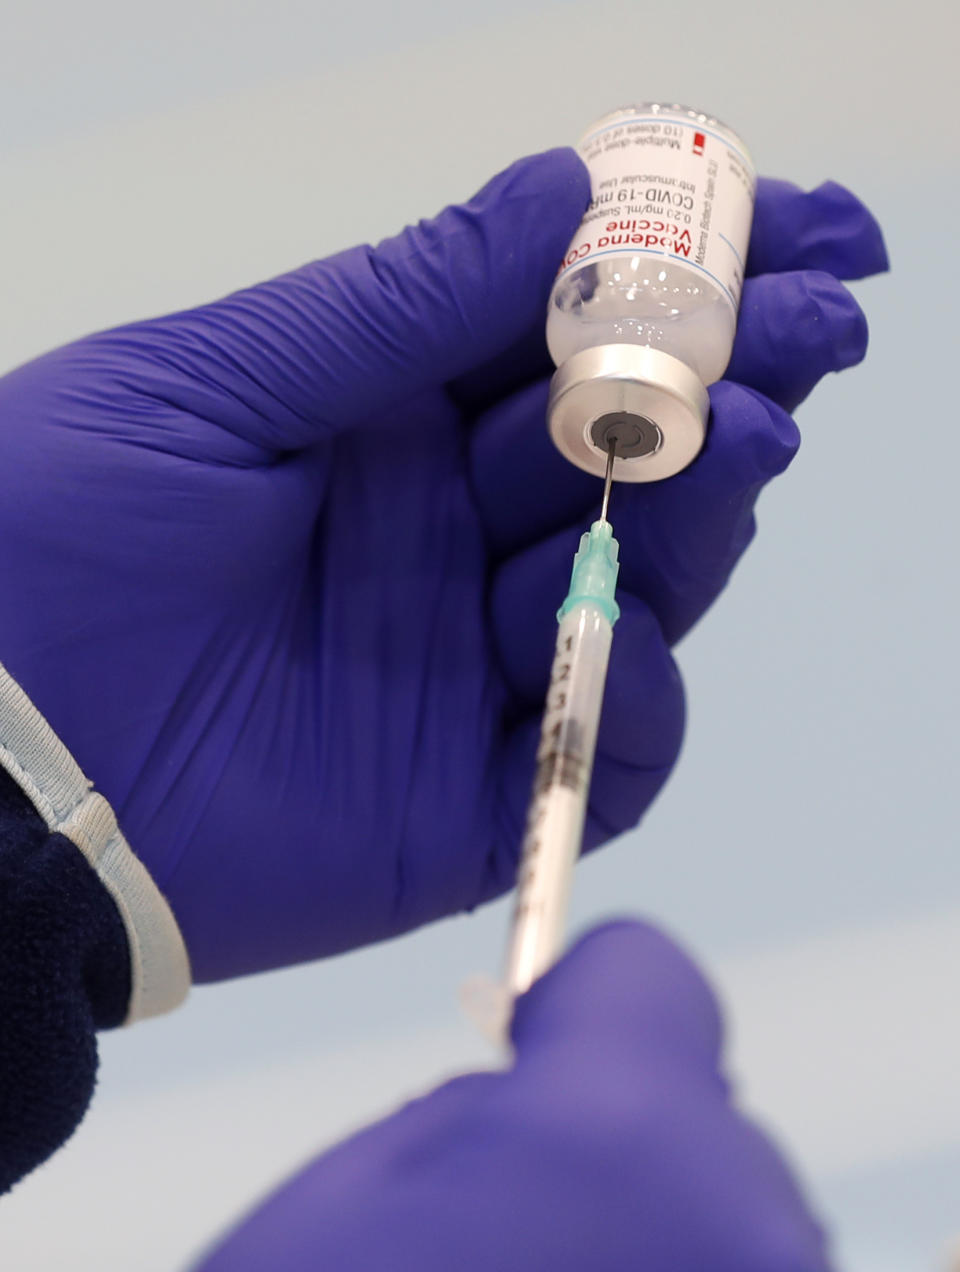 A healthcare worker prepares a Moderna COVID-19 vaccine at a sports hall in Ricany, Czech Republic, Friday, Feb. 26, 2021. With new infections soaring due to a highly contagious coronavirus variant and hospitals filling up, one of the hardest-hit countries in the European Union is facing inevitable: a tighter lockdown. (AP Photo/Petr David Josek)